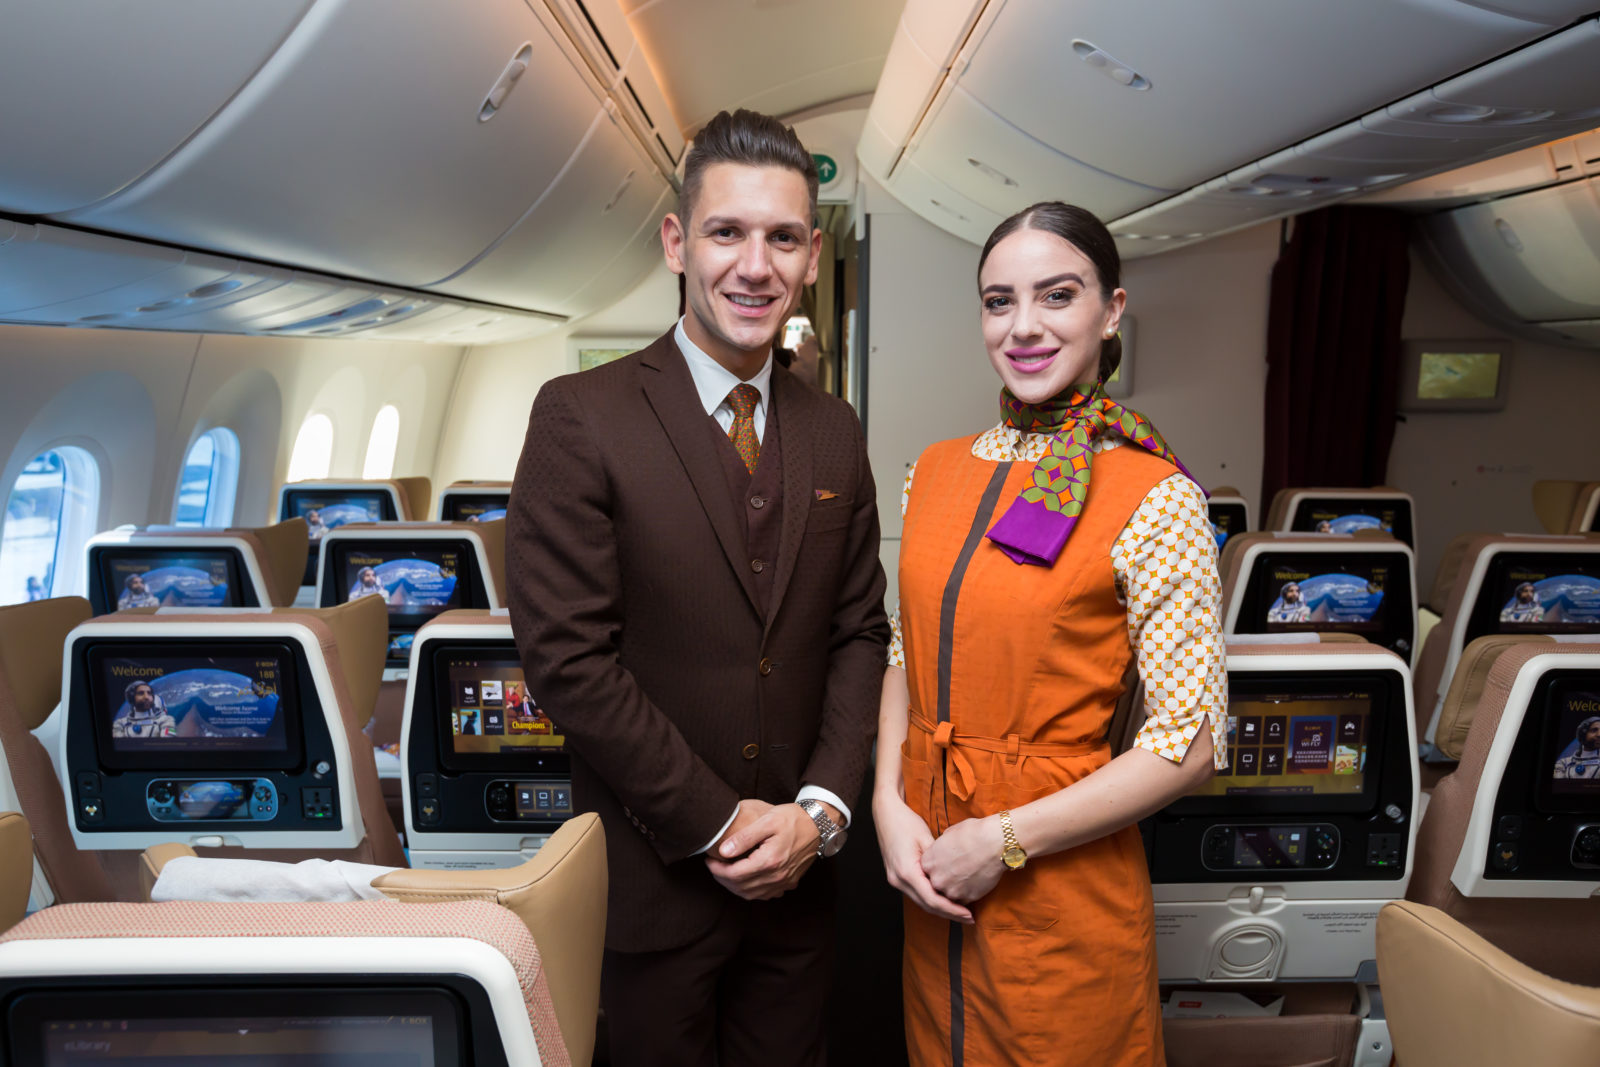 a man and woman standing in an airplane